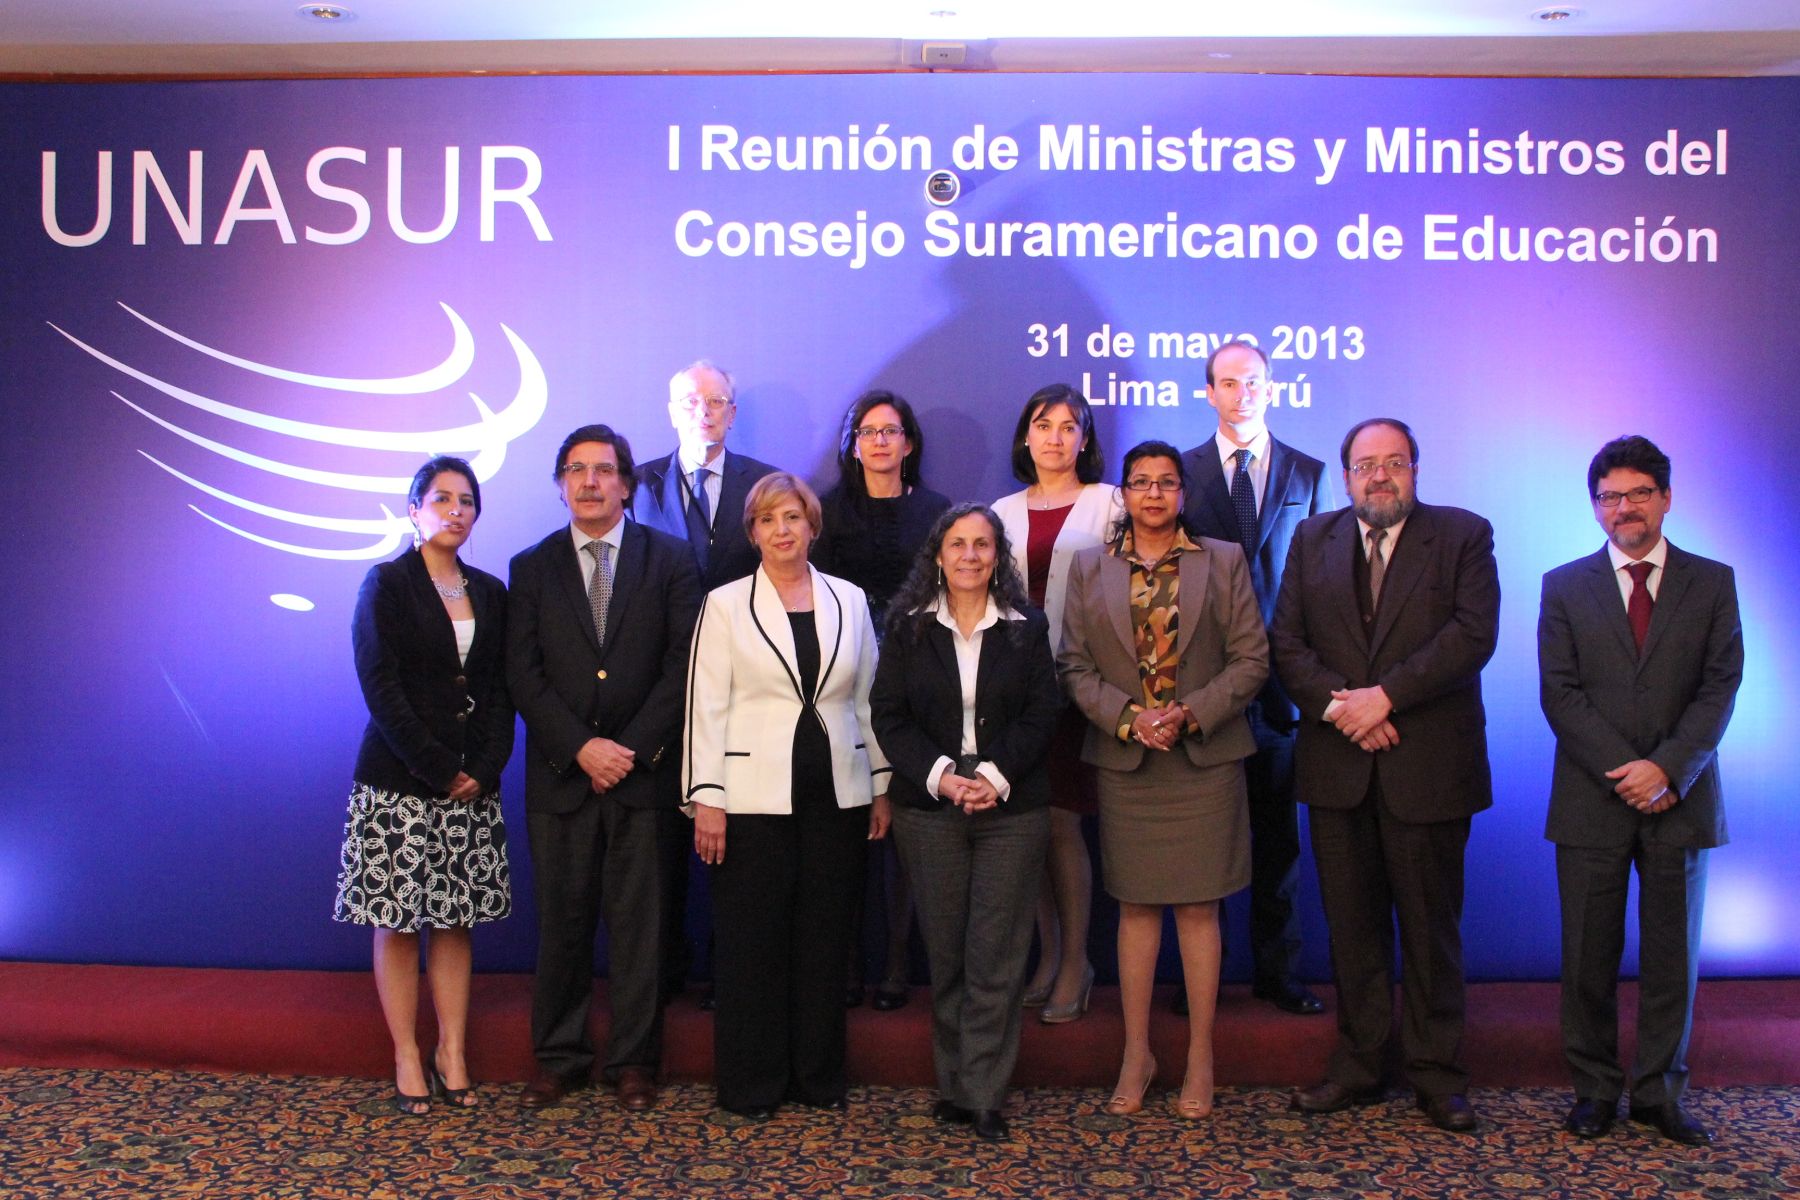 The First Meeting of the South American Culture Council takes place in Lima, Peru.